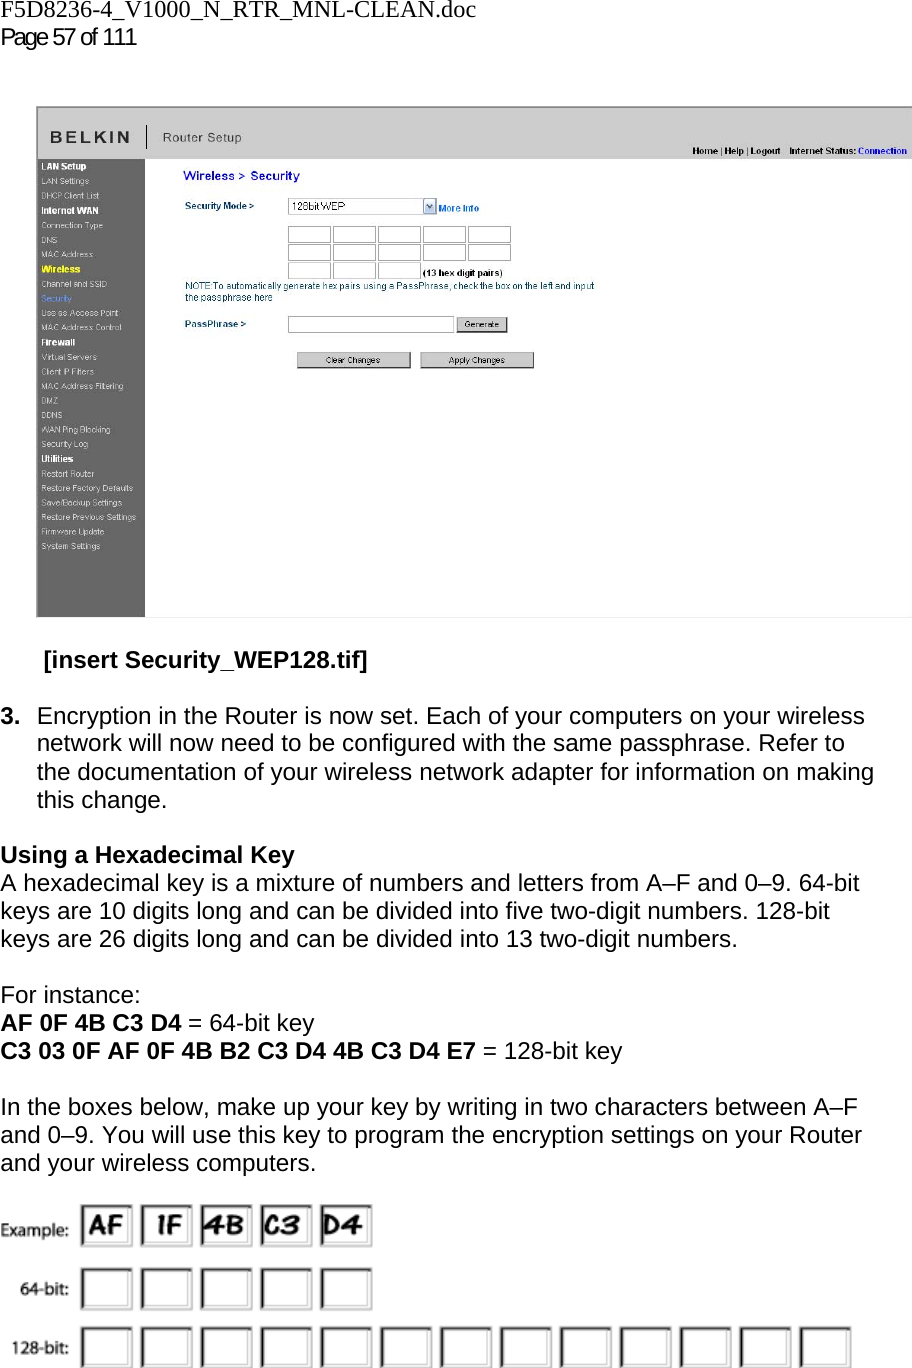 F5D8236-4_V1000_N_RTR_MNL-CLEAN.doc  Page 57 of 111      [insert Security_WEP128.tif]  3.  Encryption in the Router is now set. Each of your computers on your wireless network will now need to be configured with the same passphrase. Refer to the documentation of your wireless network adapter for information on making this change.  Using a Hexadecimal Key A hexadecimal key is a mixture of numbers and letters from A–F and 0–9. 64-bit keys are 10 digits long and can be divided into five two-digit numbers. 128-bit keys are 26 digits long and can be divided into 13 two-digit numbers.   For instance: AF 0F 4B C3 D4 = 64-bit key C3 03 0F AF 0F 4B B2 C3 D4 4B C3 D4 E7 = 128-bit key  In the boxes below, make up your key by writing in two characters between A–F and 0–9. You will use this key to program the encryption settings on your Router and your wireless computers.   